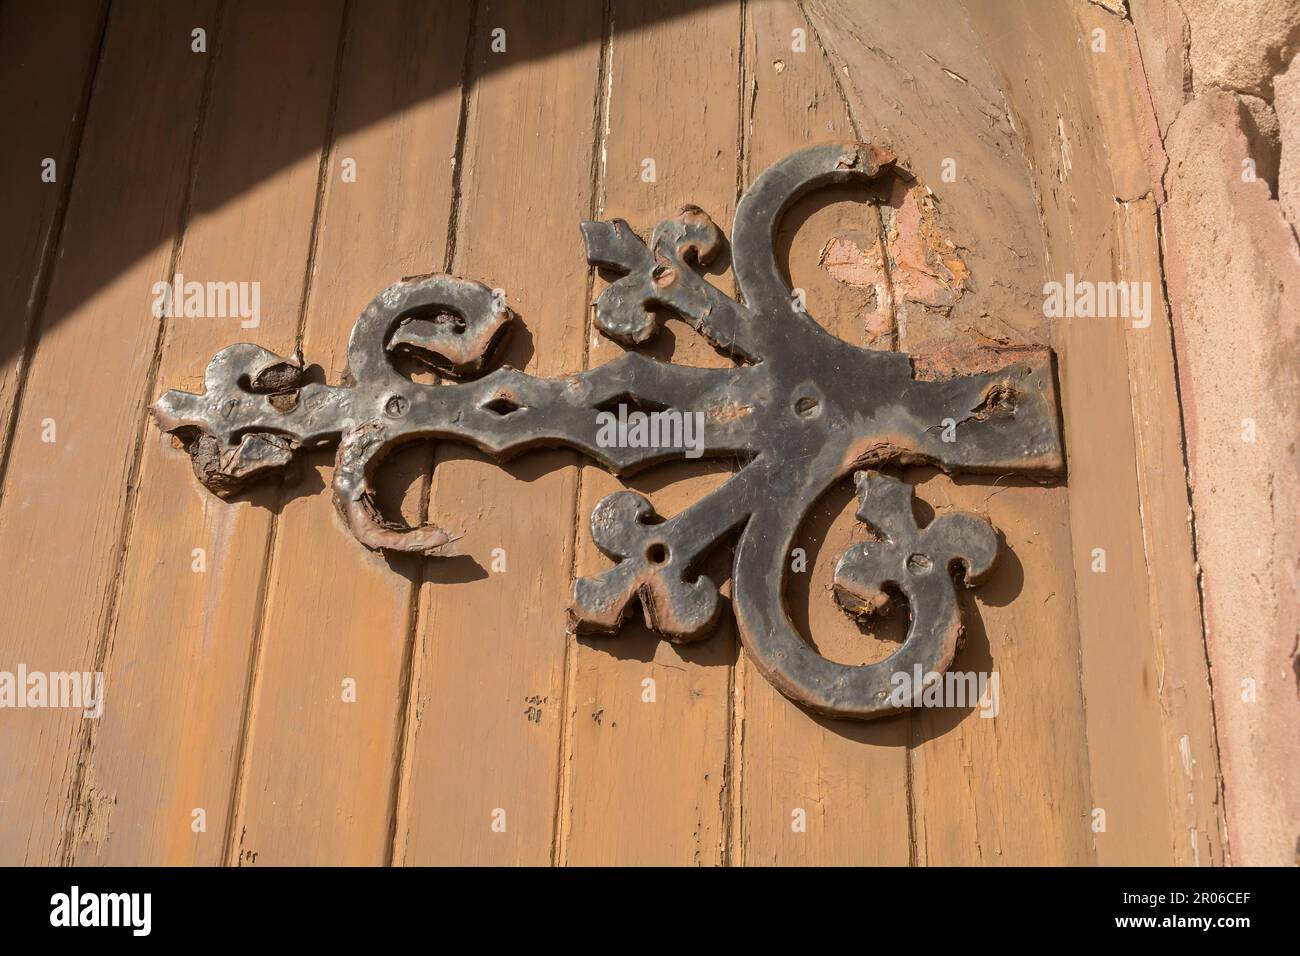 Large church door hinge with texture from corrosion Stock Photo